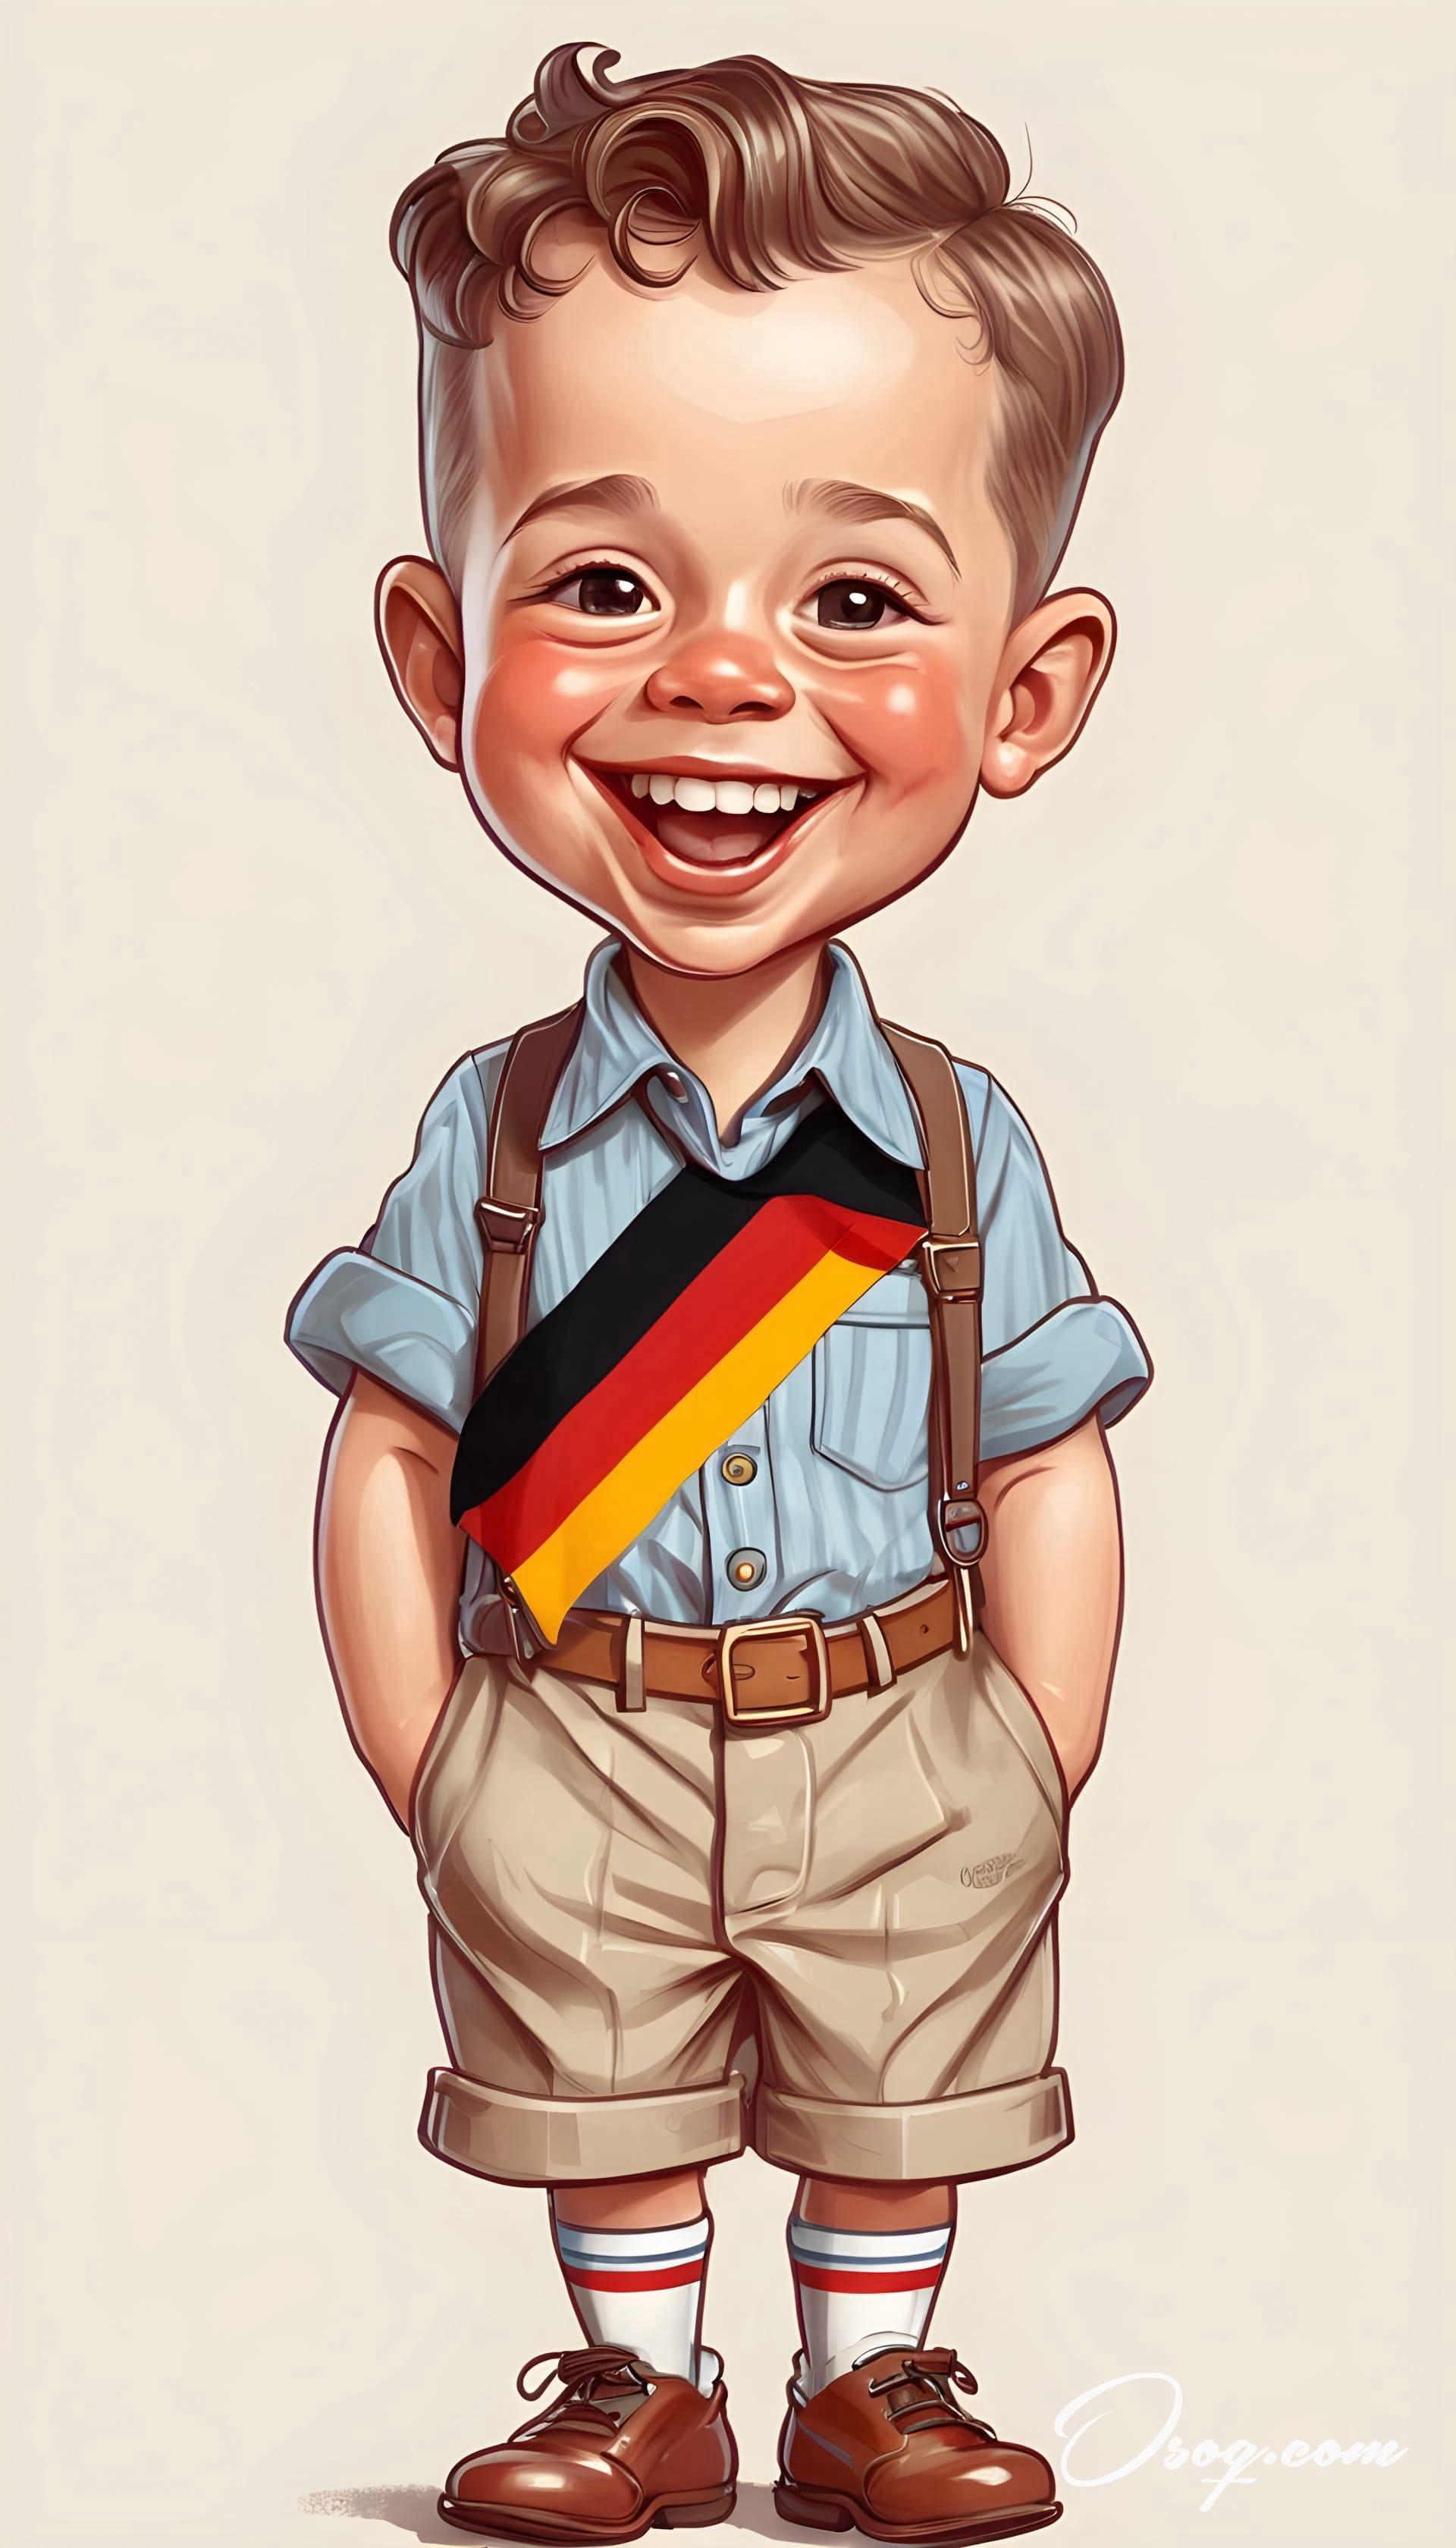 Germany caricature 02